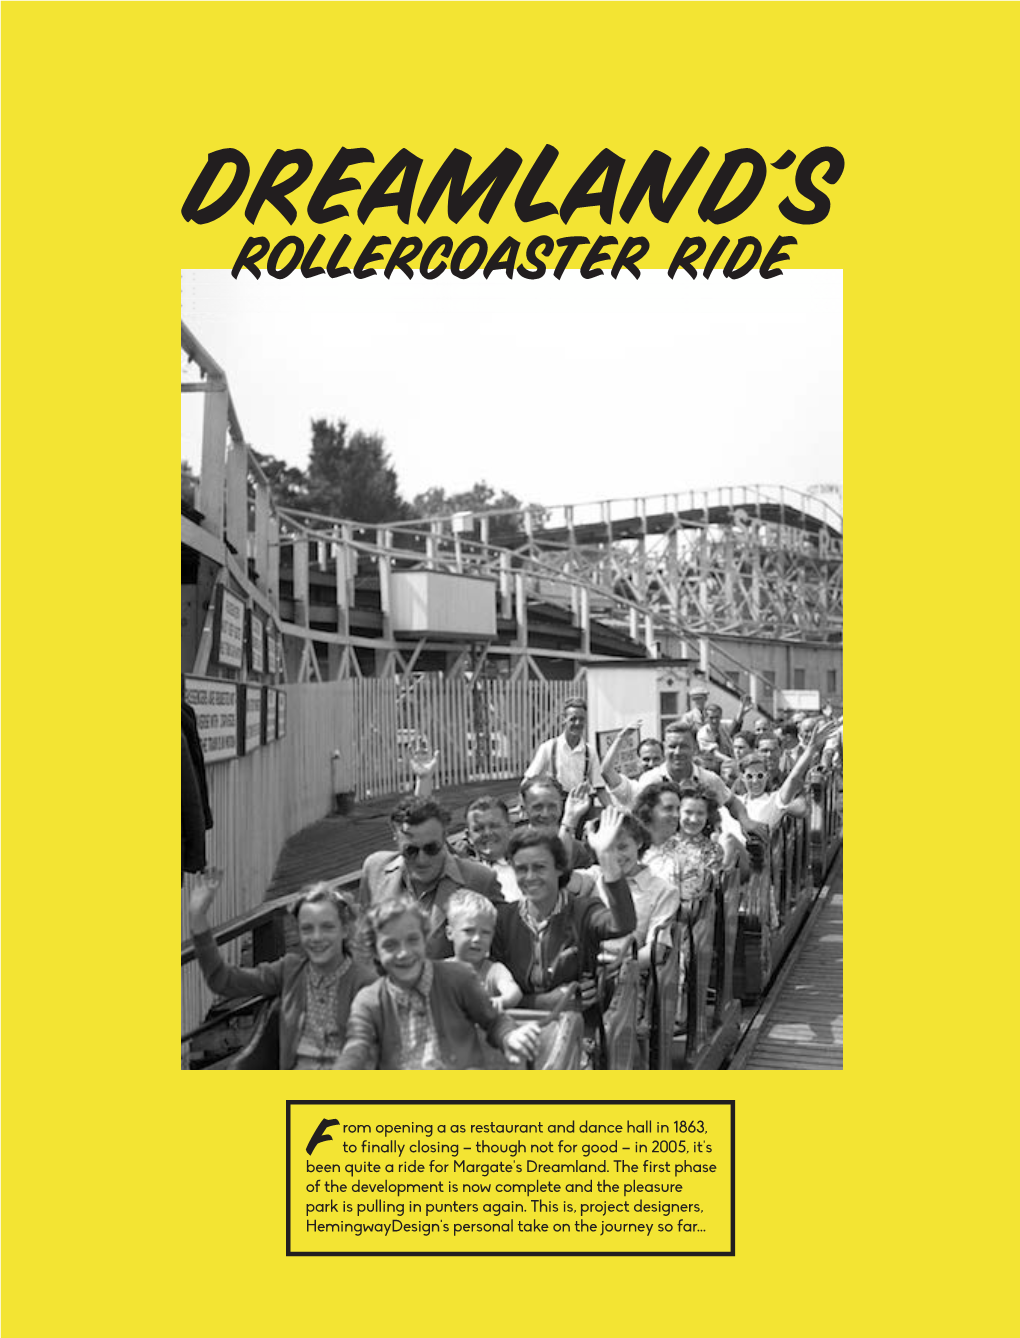 Dreamland's Heyday with 2.5Million Visitors a Year 2008 Fire Destroys Part of the Scenic Railway